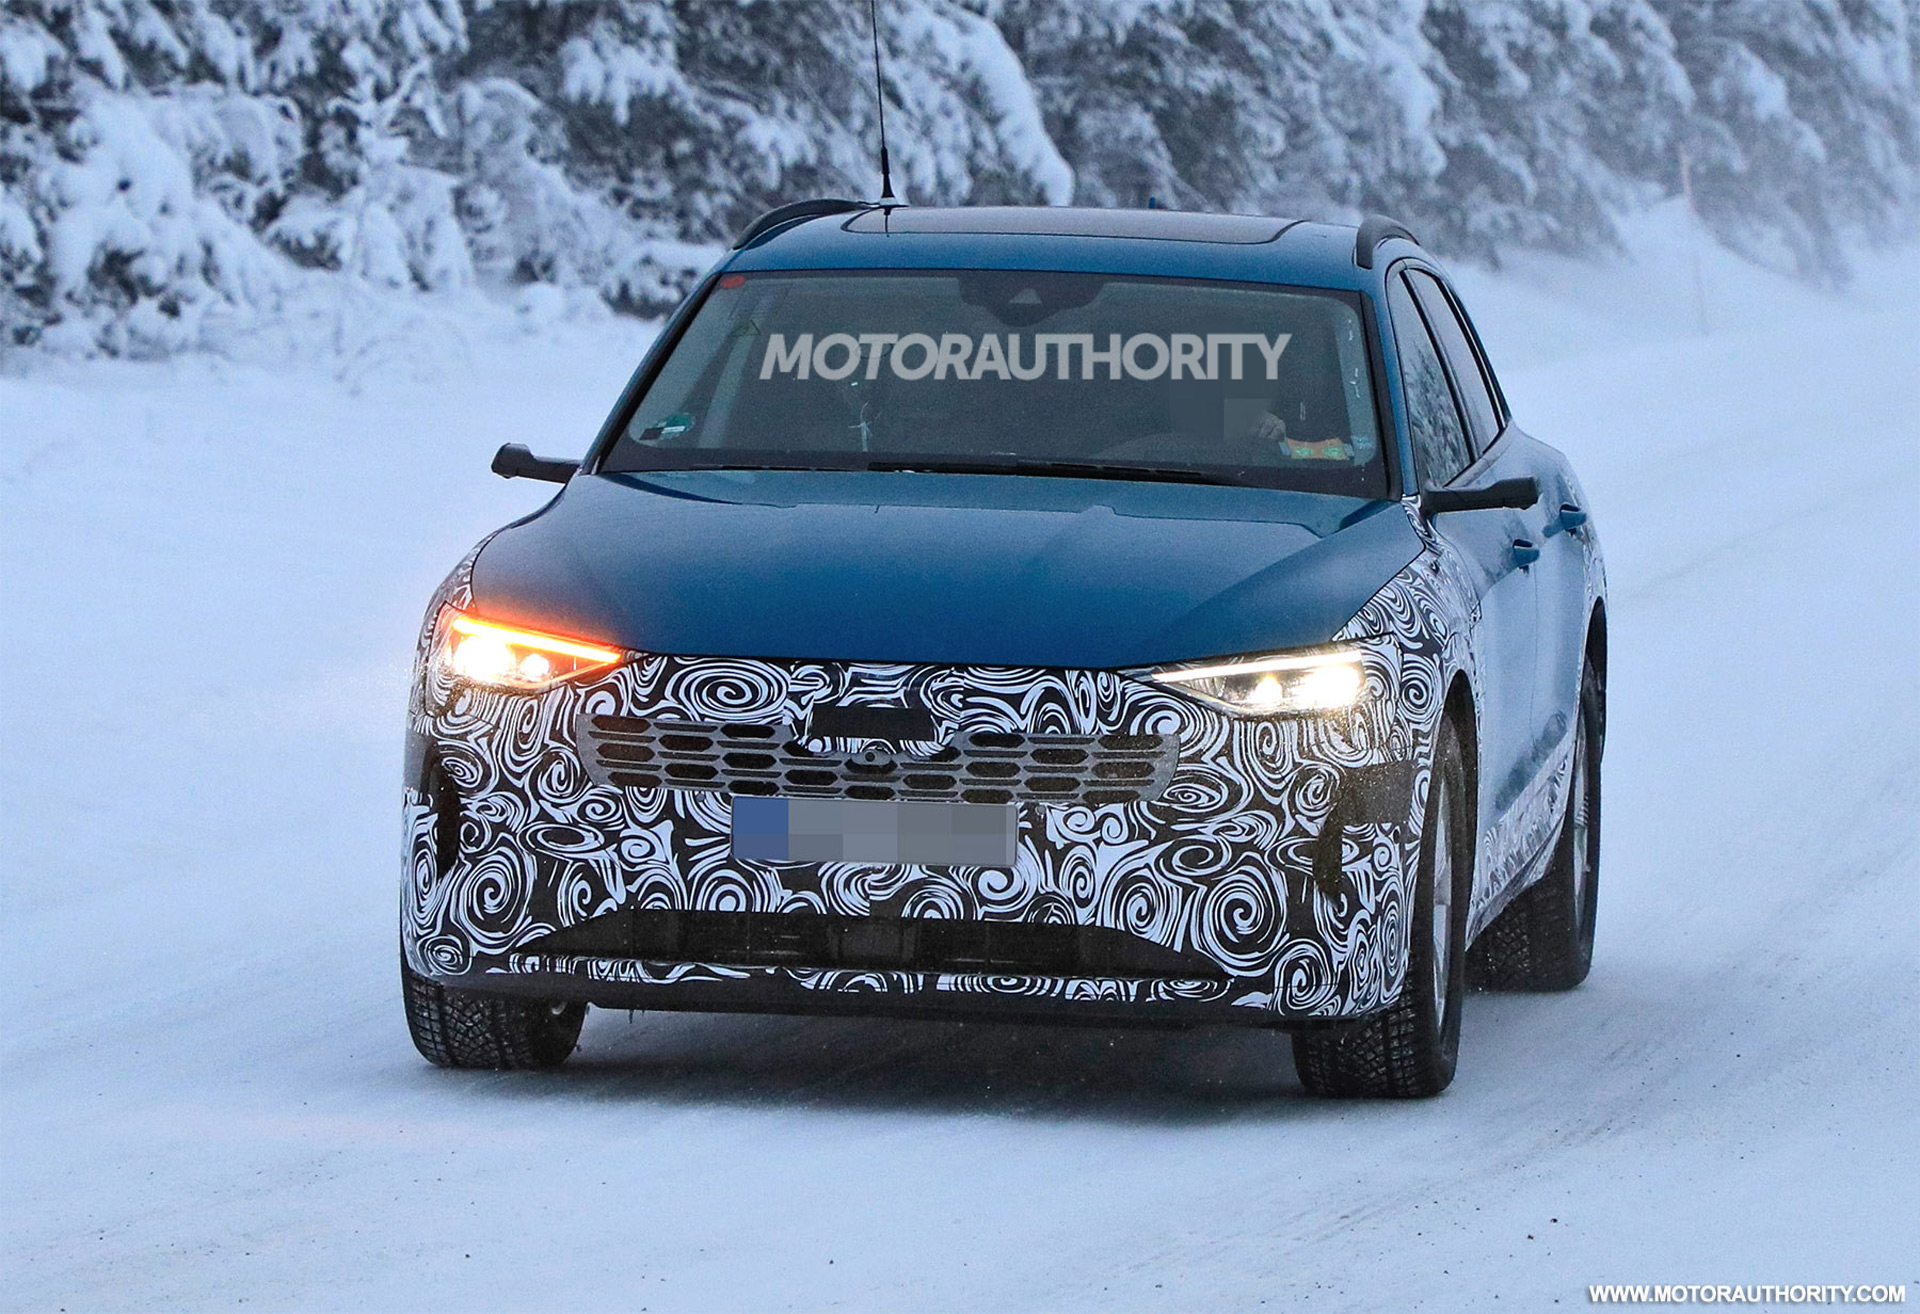 Audi spy shots: Mid-cycle facelift the way